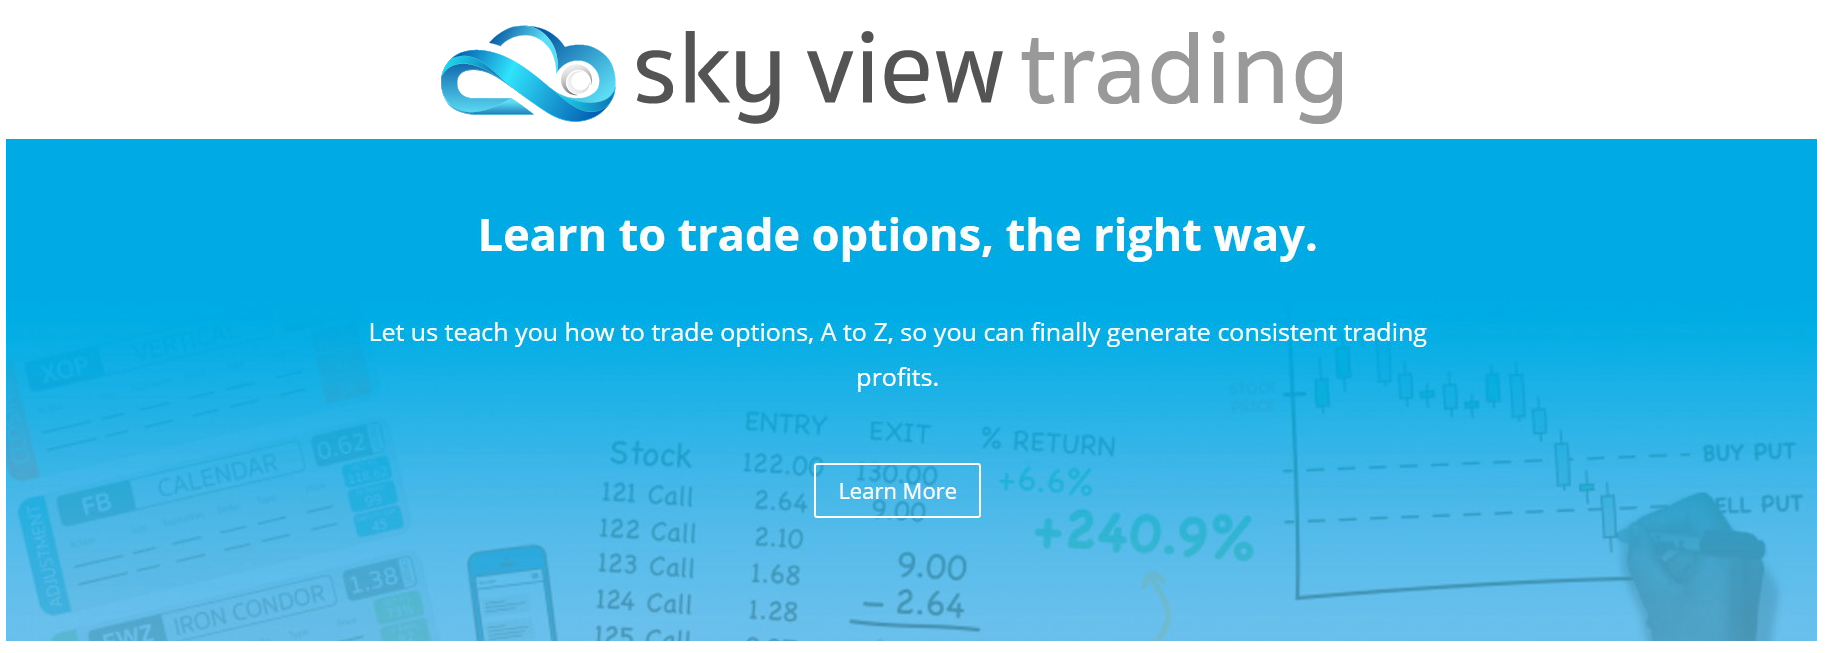 skyview trading banner Trade Options With Me